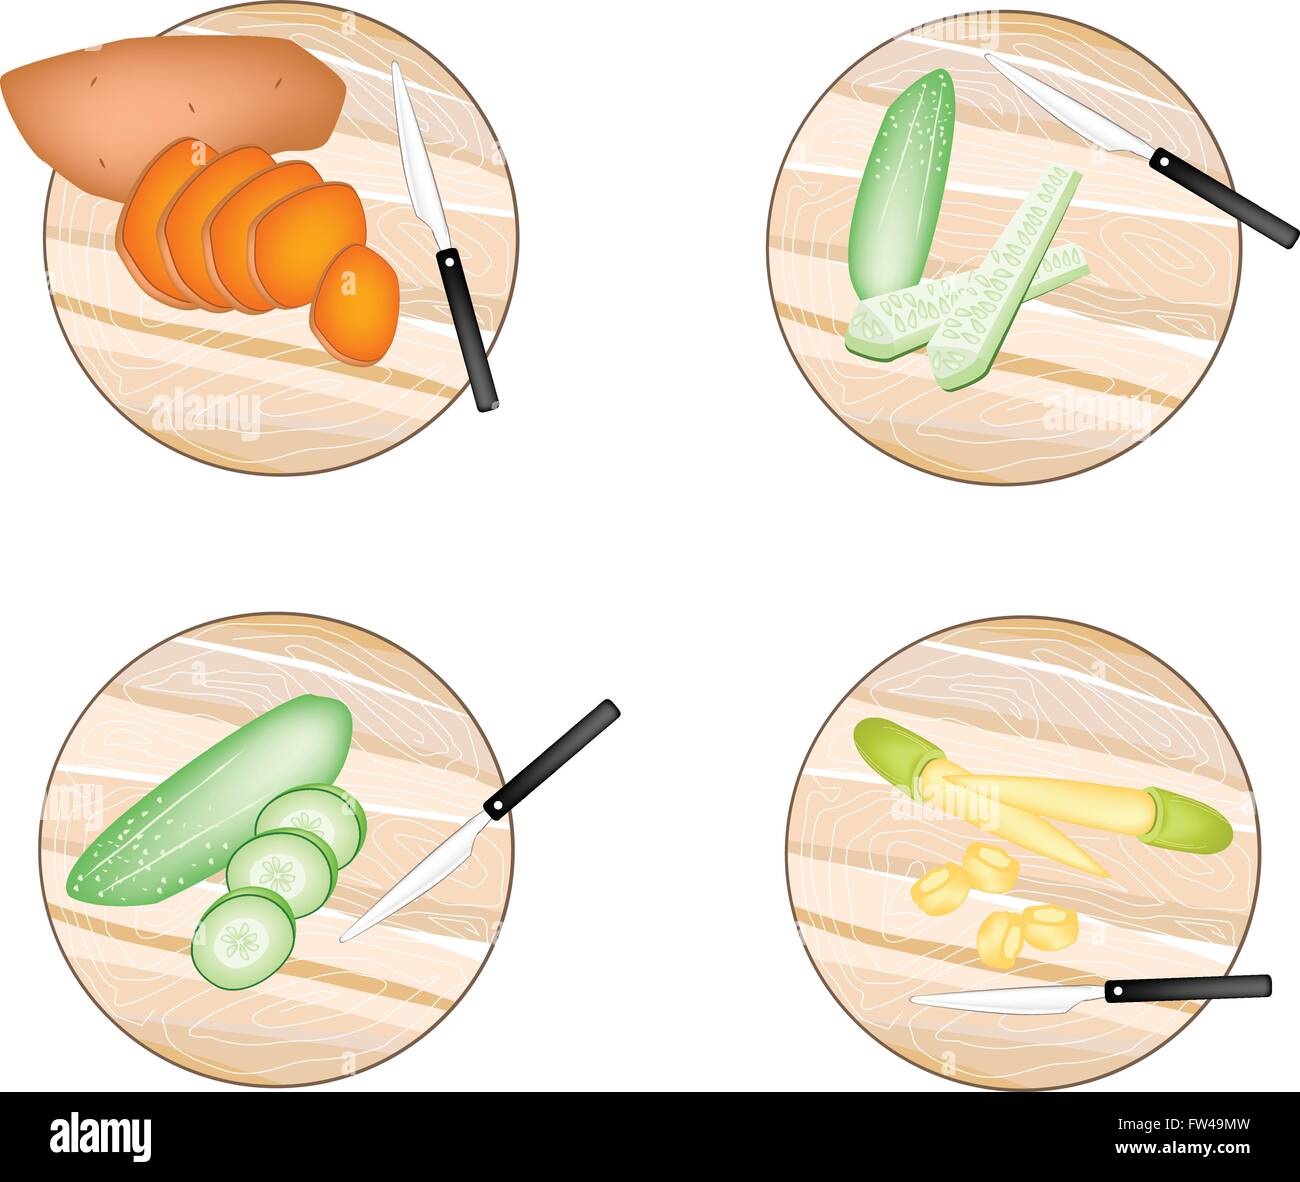 Vegetable, Illustration of Orange Sweet Potatoes, Cucumber and Baby Corns on Wooden Cutting Boards. Stock Vector